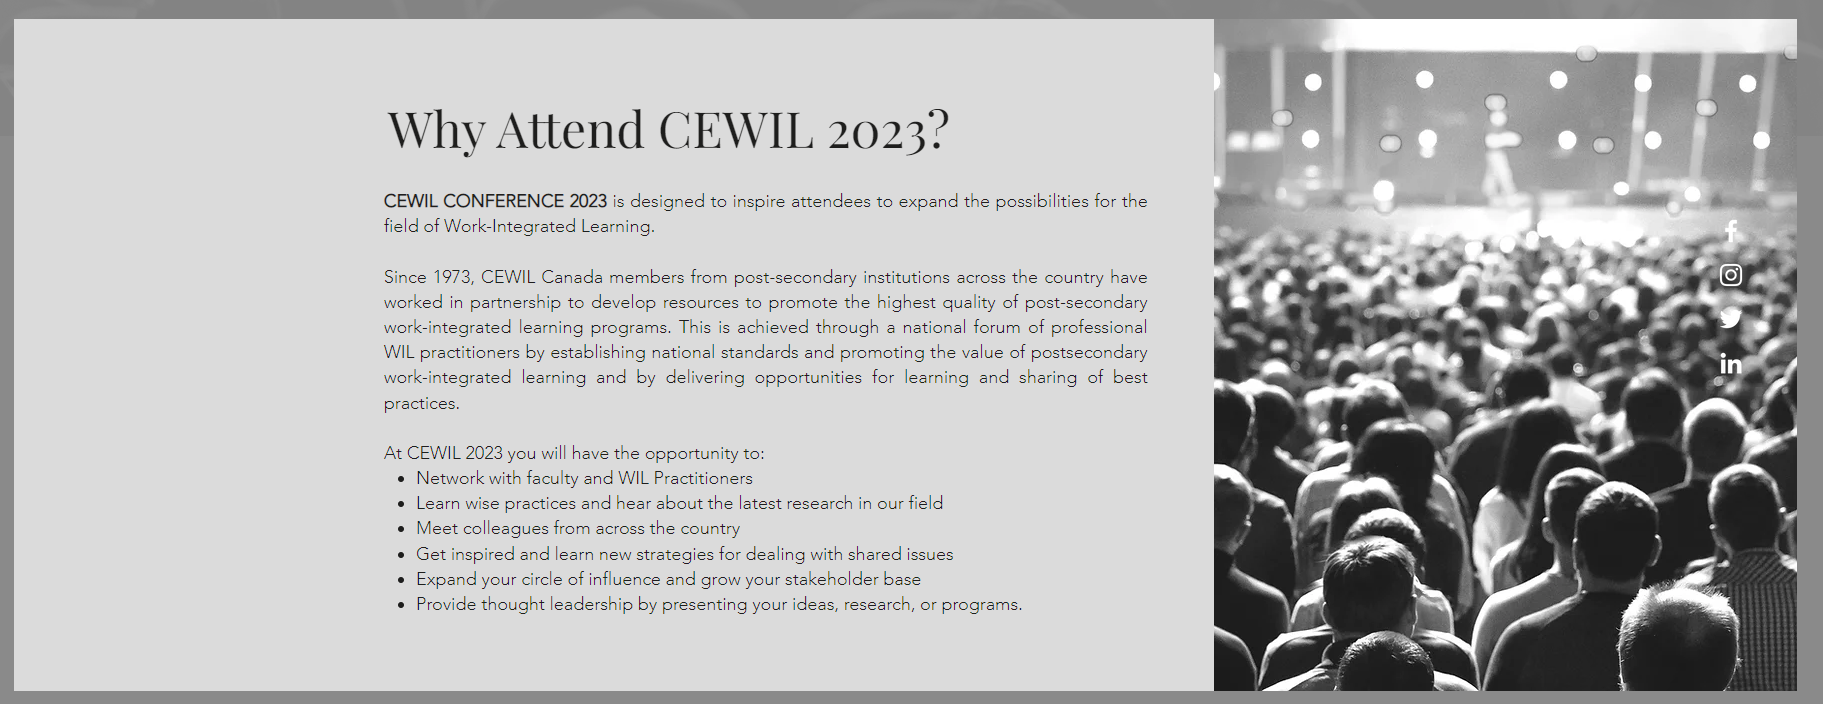 CEWIL Conference 2023 WIL A Sea of Opportunity CDPC CEDC